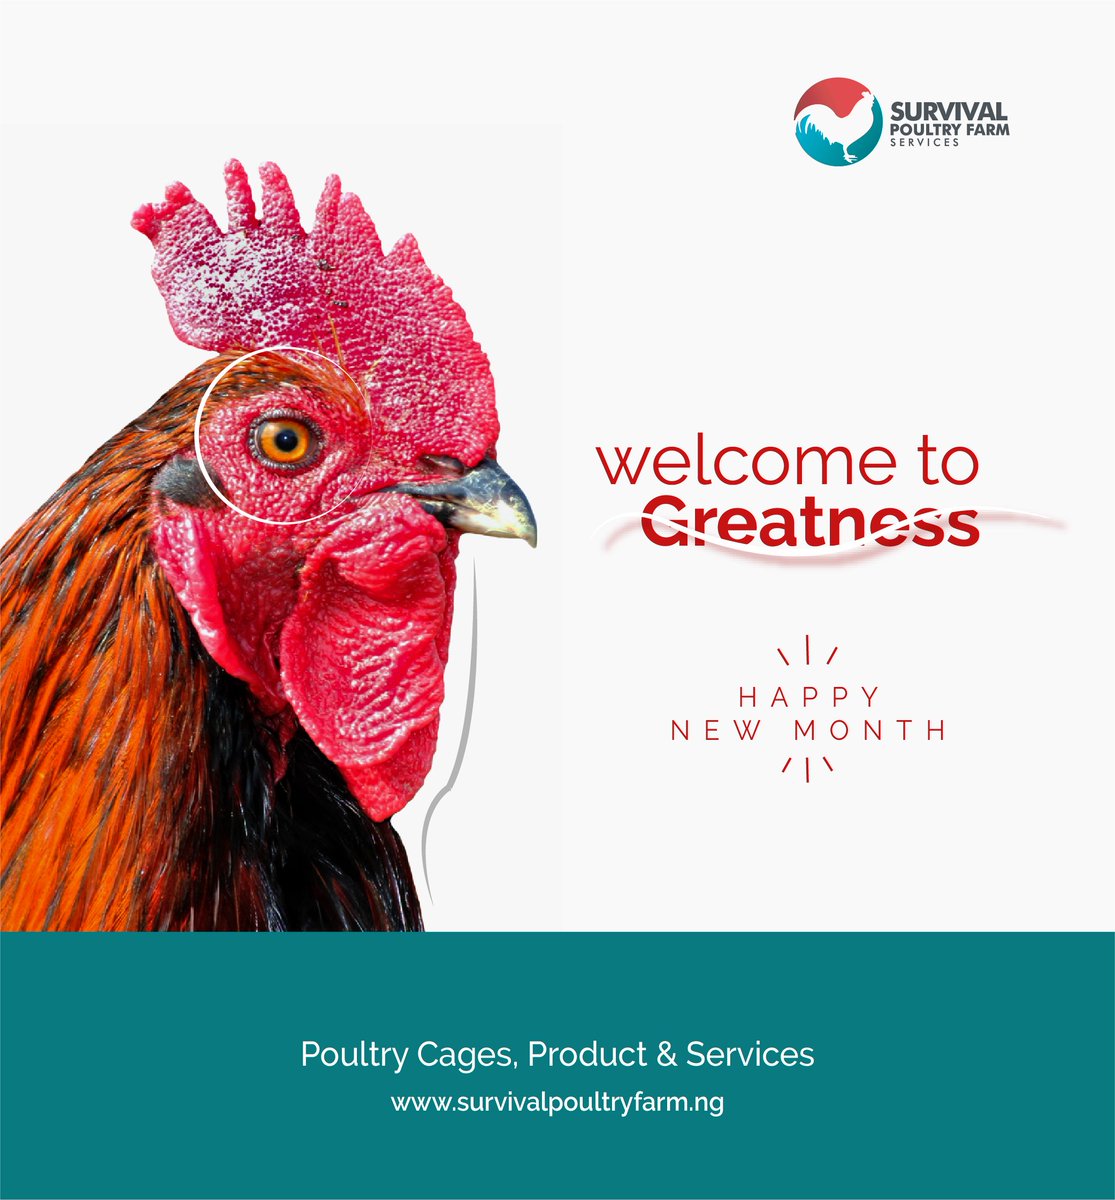 Welcome to march the month of grestness and we wish all our esteemed customers out there,  HAPPY NEW MONTH 
#spfs #agro
#poultry #farmer
#farming #layer
#survival_nation
#agriculture #pen
#birds #backyardpoultry
#pol #poultryfarmer
#cage #agricultural
#poultrycage #broilers